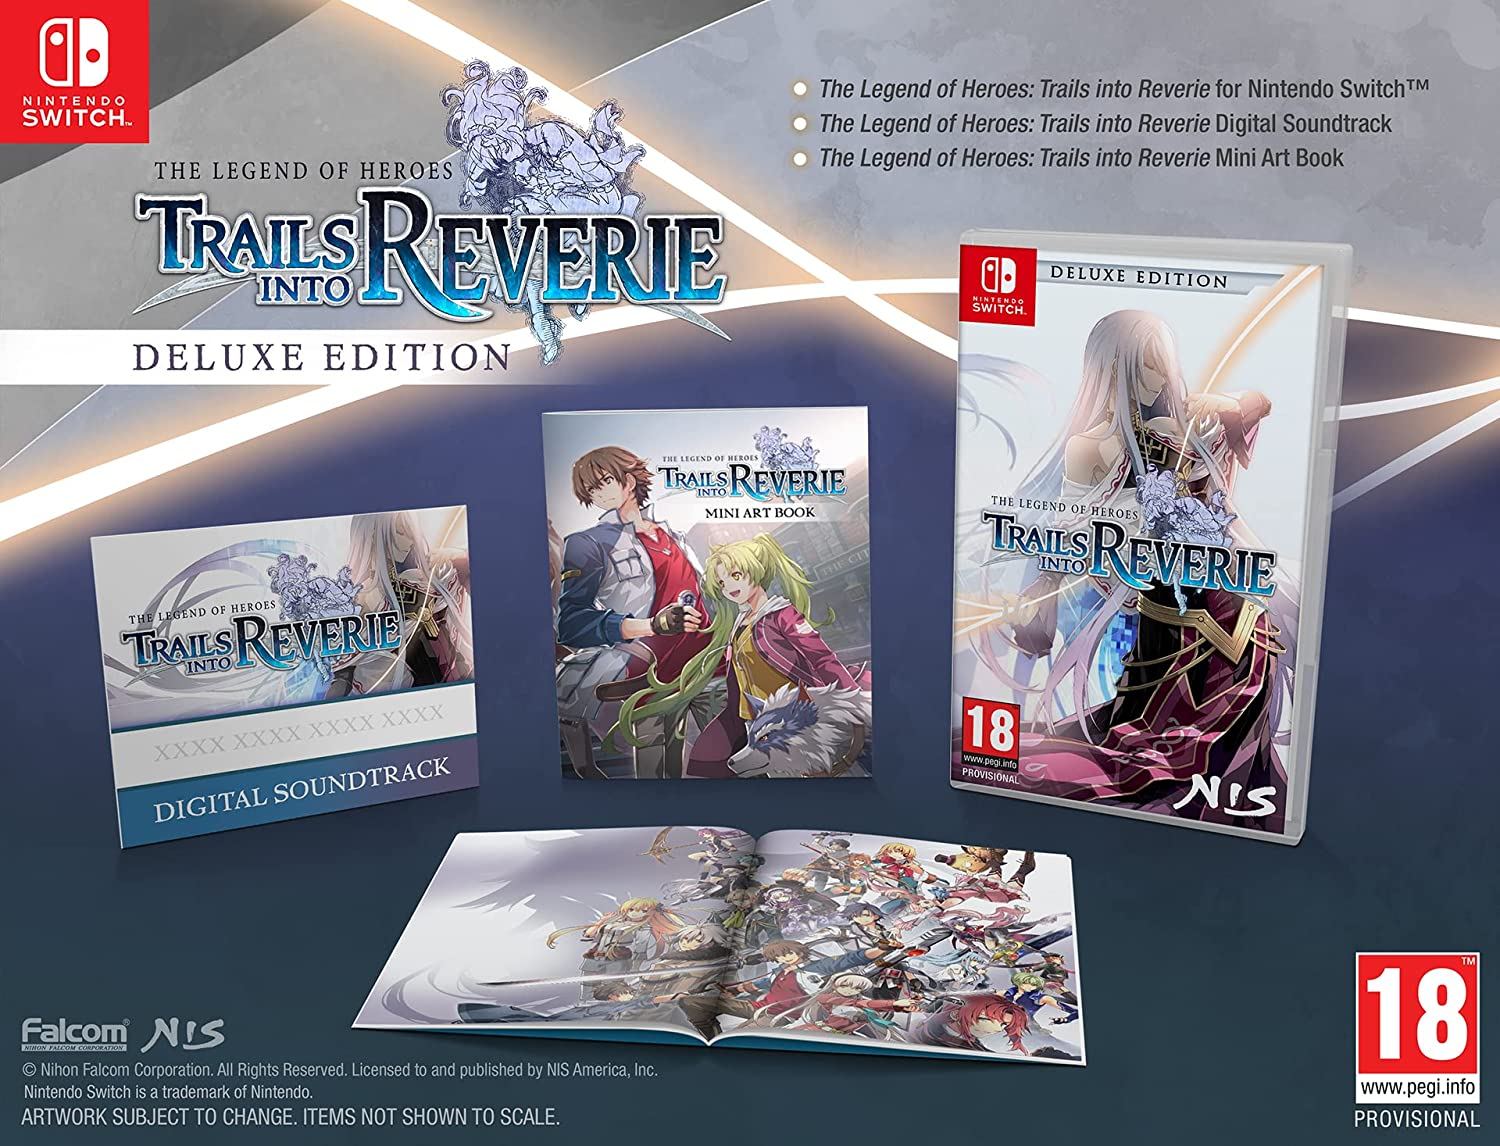 the-legend-of-heroes-trails-into-reverie-deluxe-edition-for-nintendo-switch